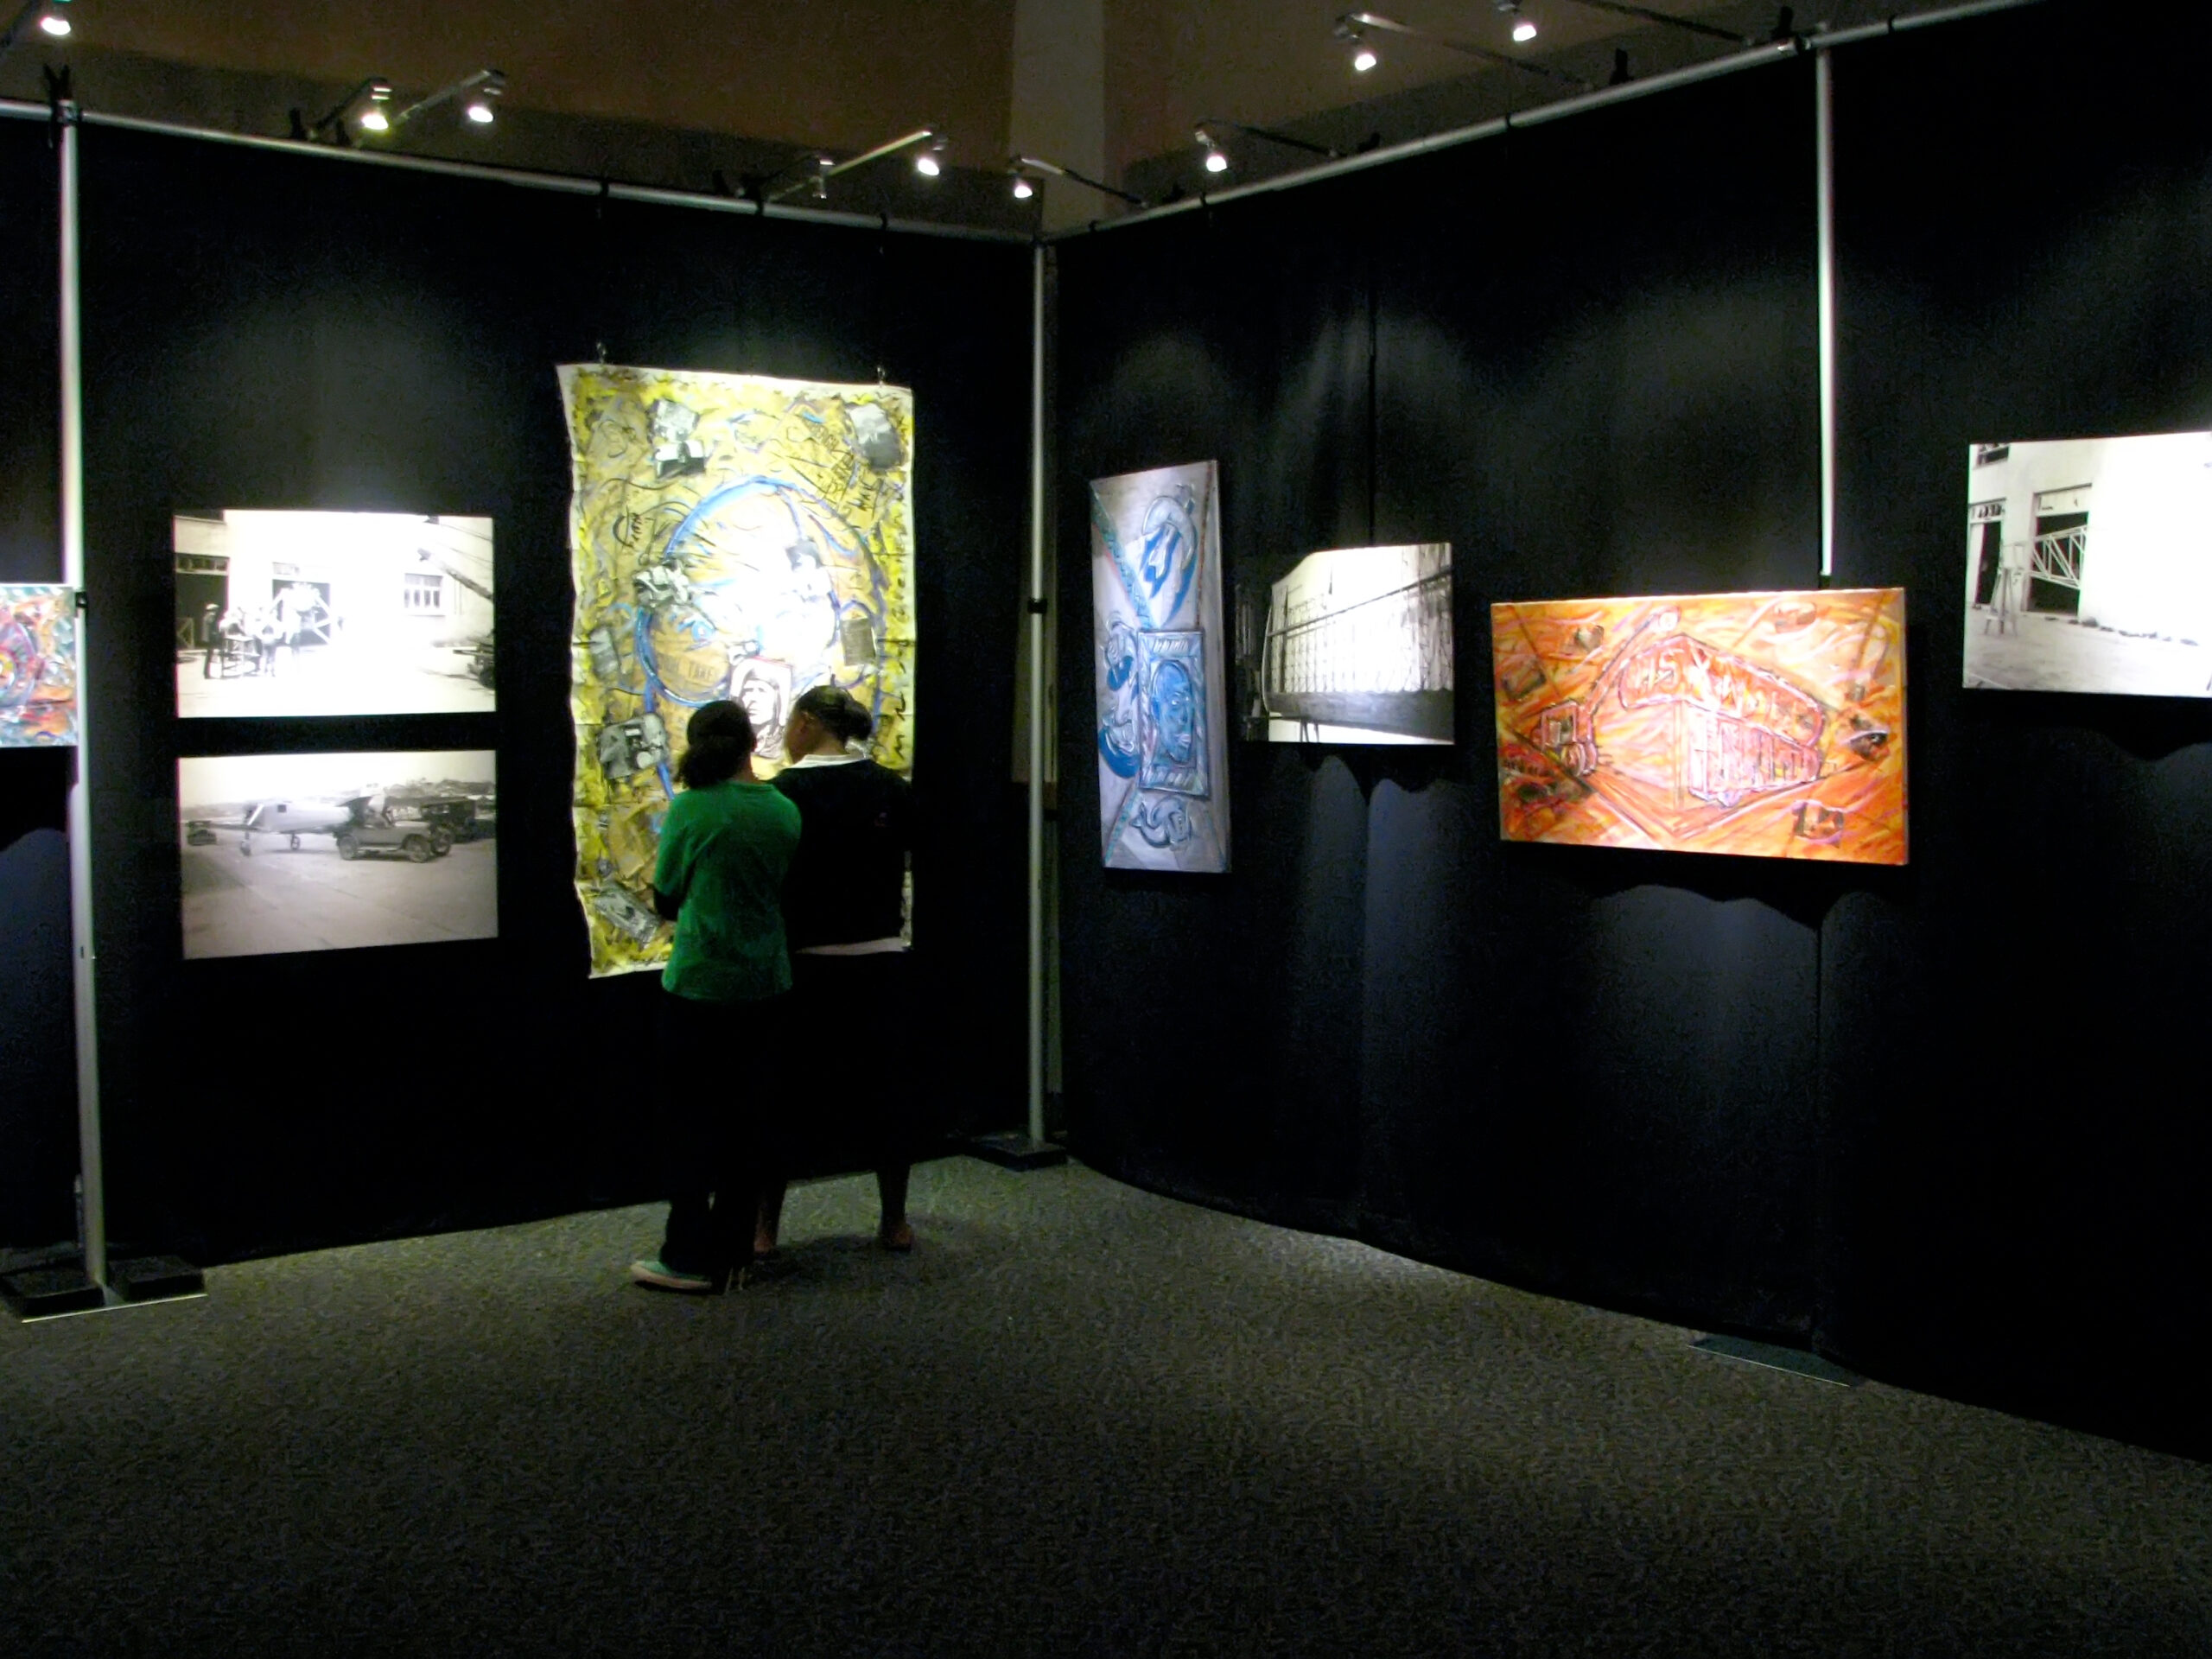 Image of two people viewing a painting by Nova Hall and his grandfather's photographs from the Flying Over Time Exhibition at Arizona State University in 2011 in Phoenix, Arizona.